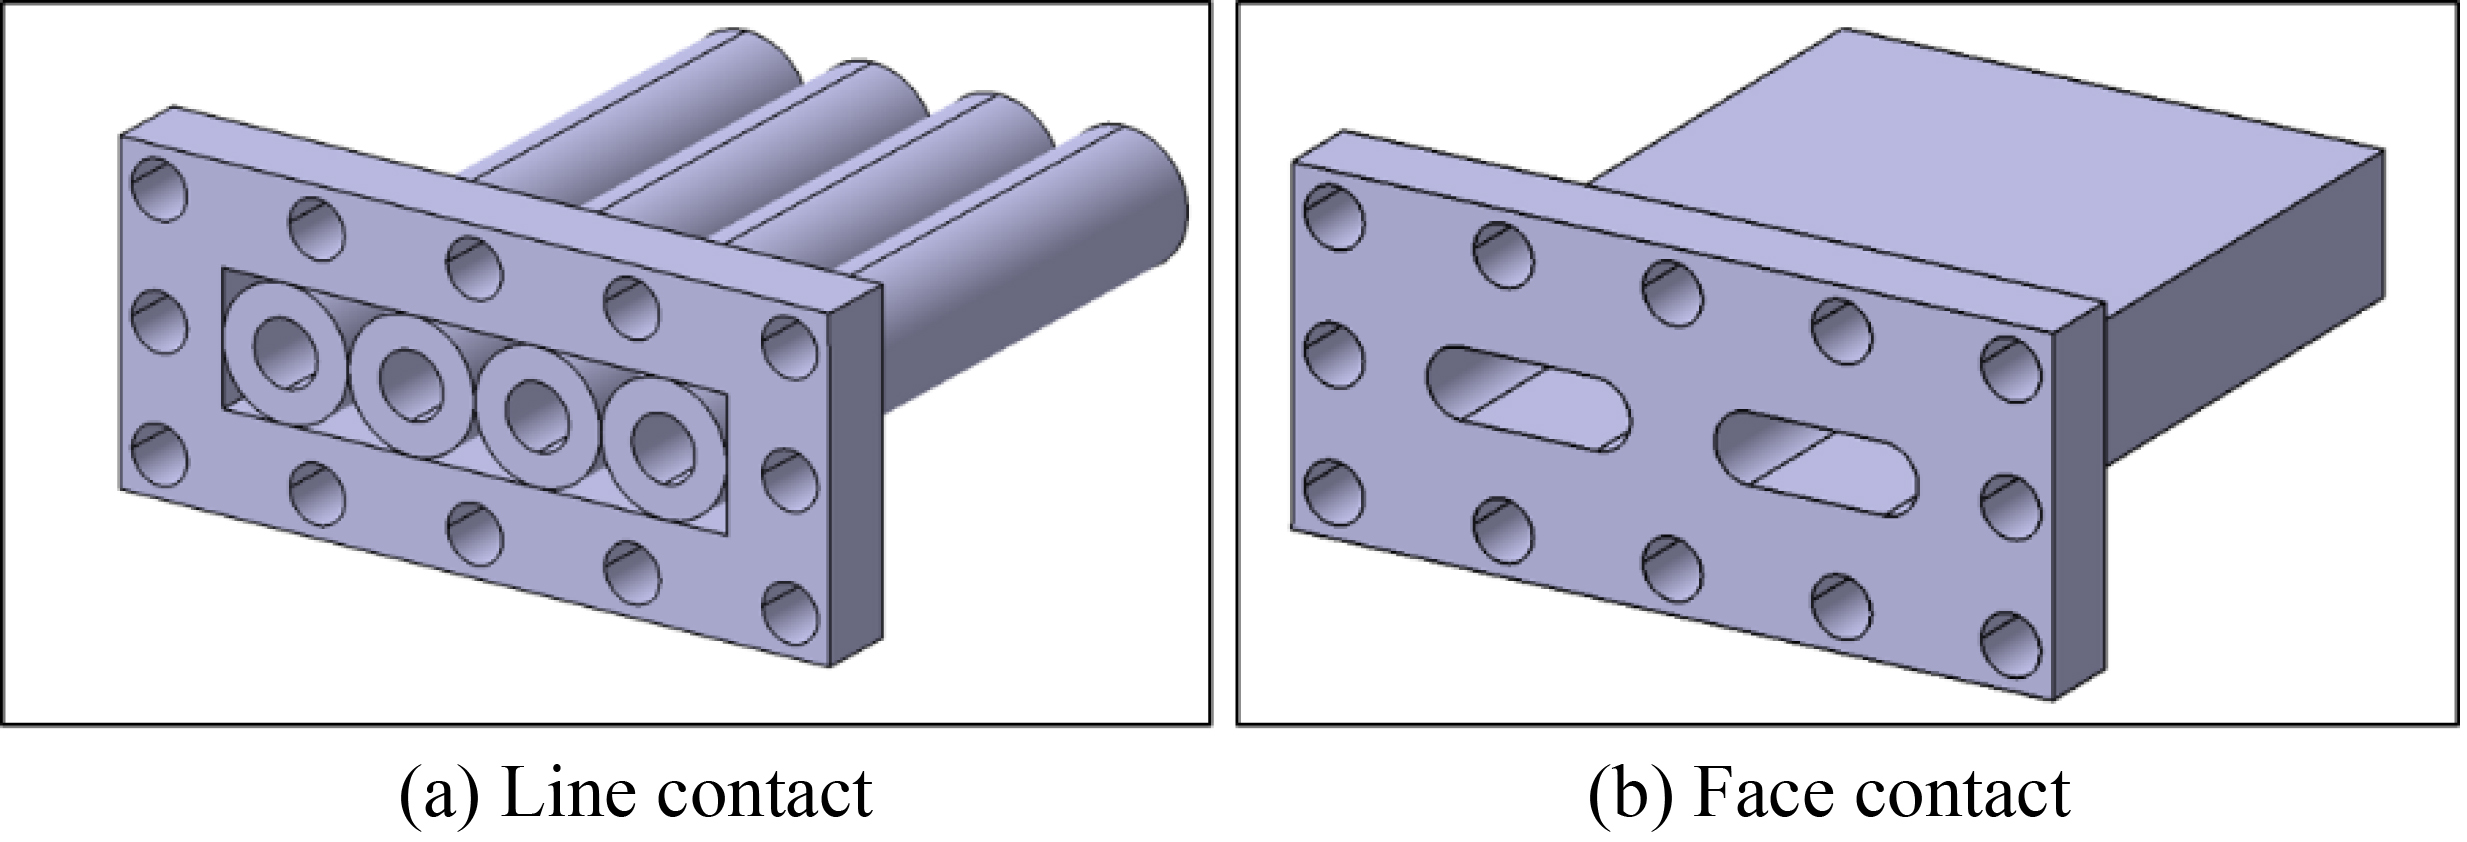 MH module with (a) line contact (Type 1) and (b) face contact (Type 2).